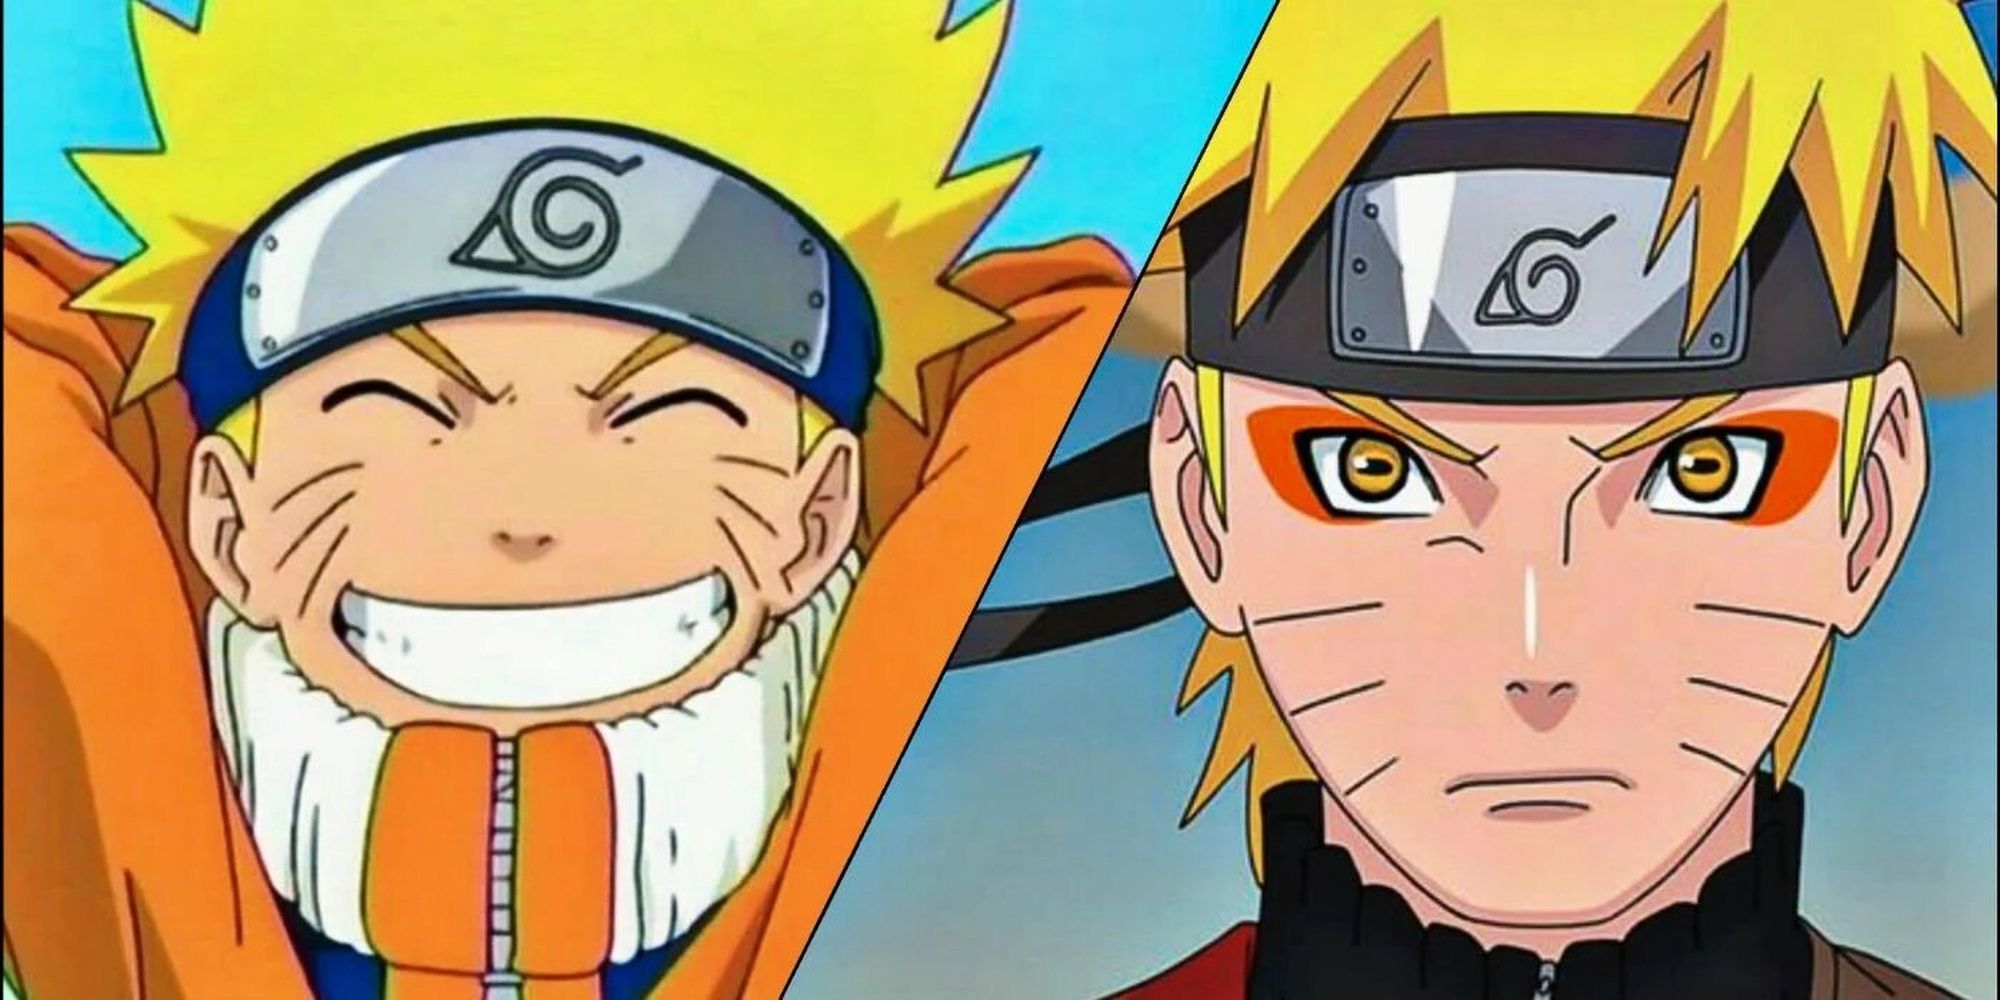 Naruto as a boy and as a teenager